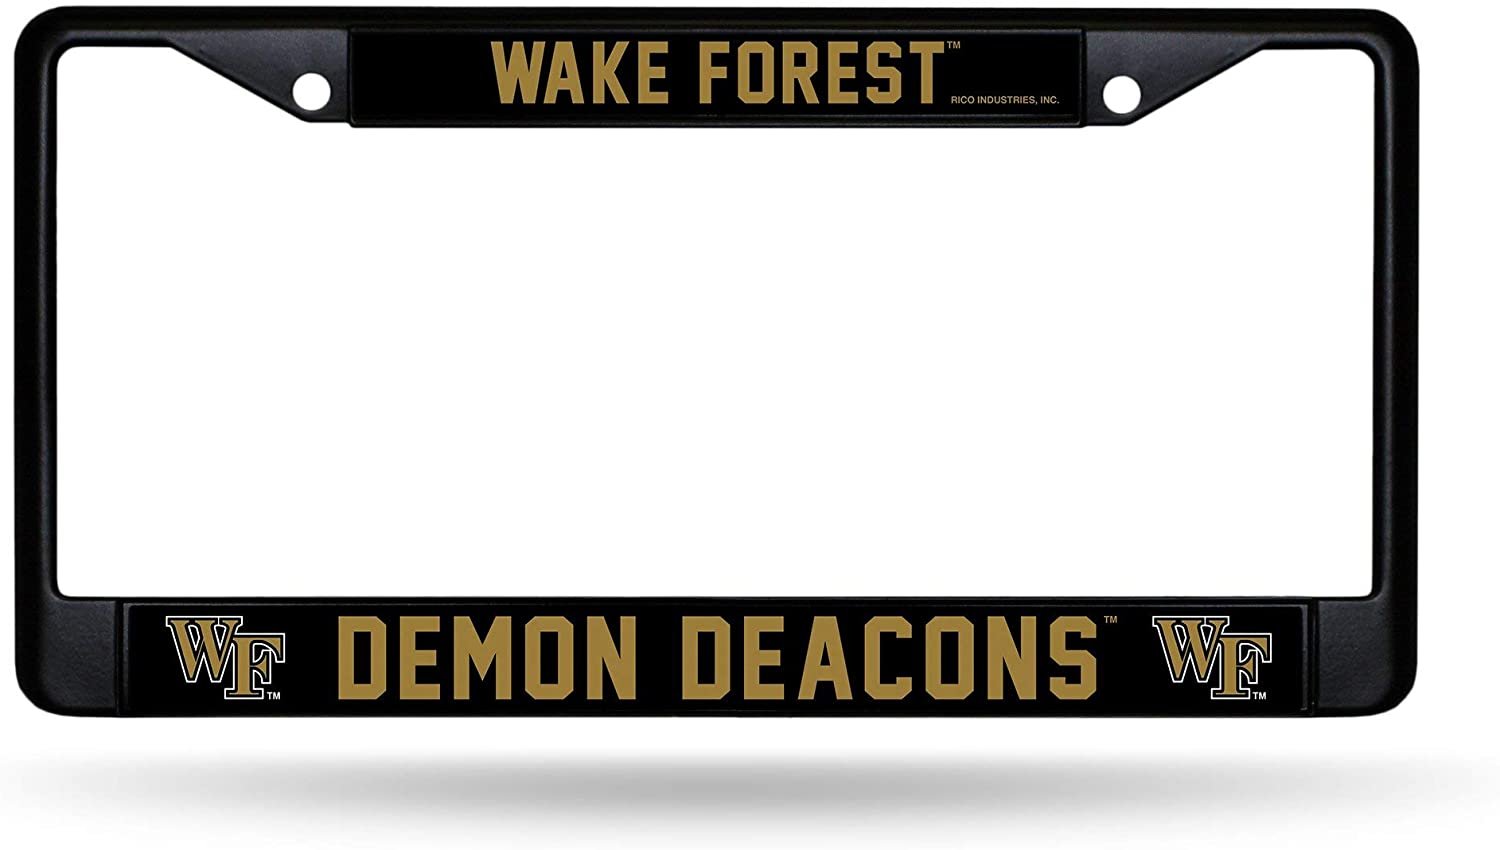 Wake Forest University Demon Deacons Black License Plate Frame Tag Cover 6 x 12 Inches